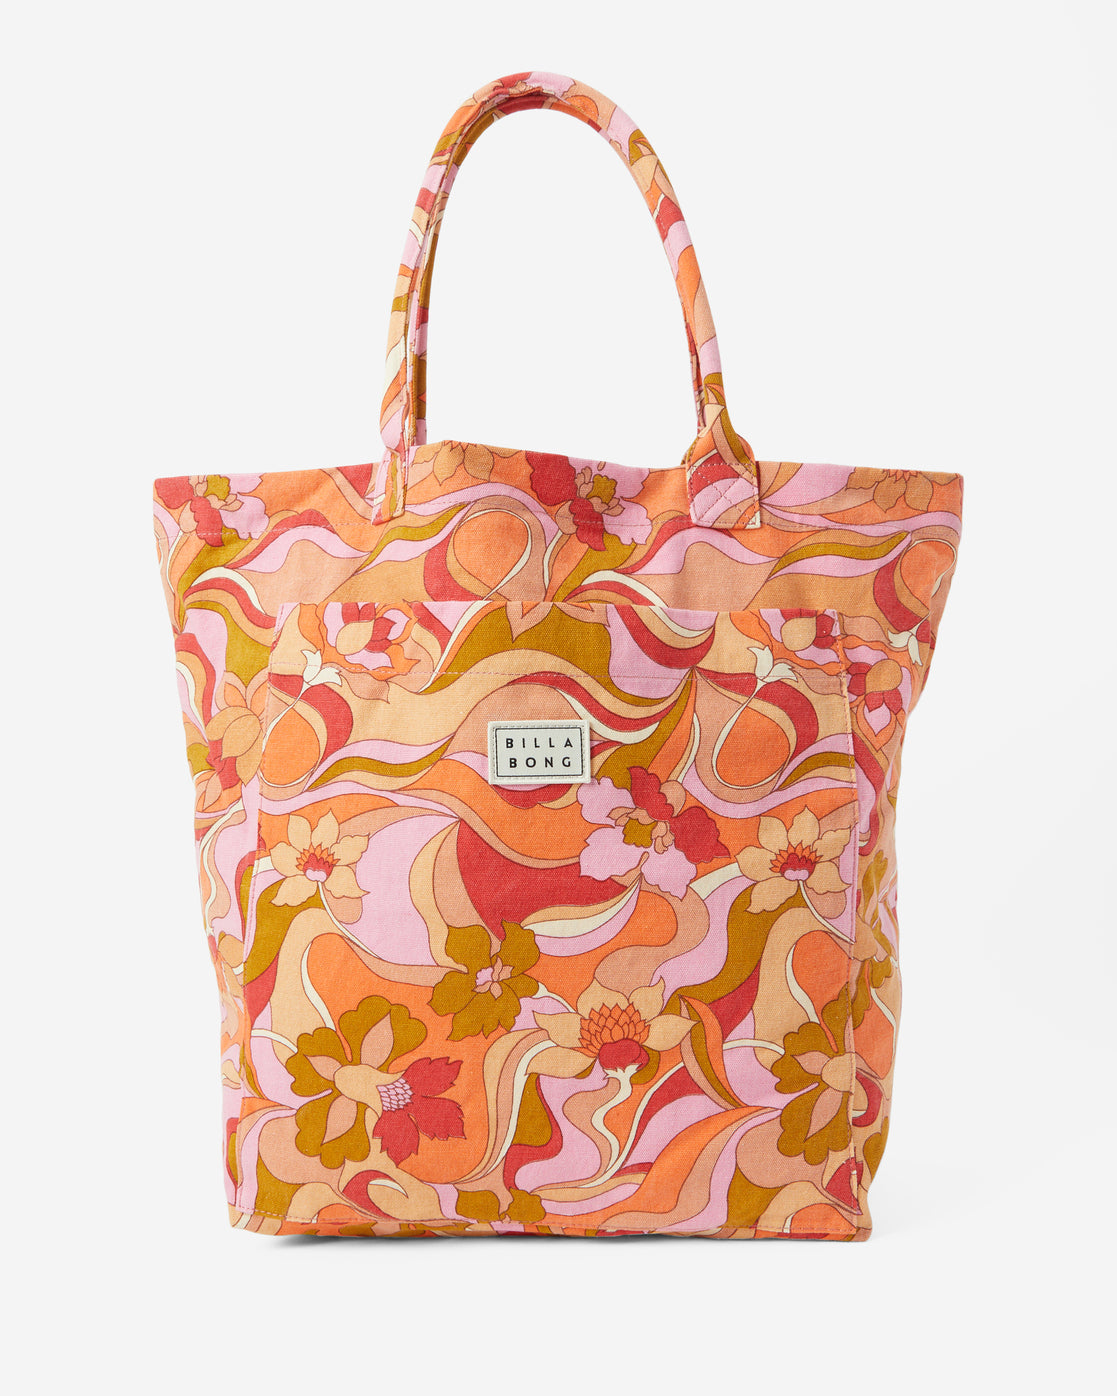 ALONG THE WAY TOTE - ABJBT00126